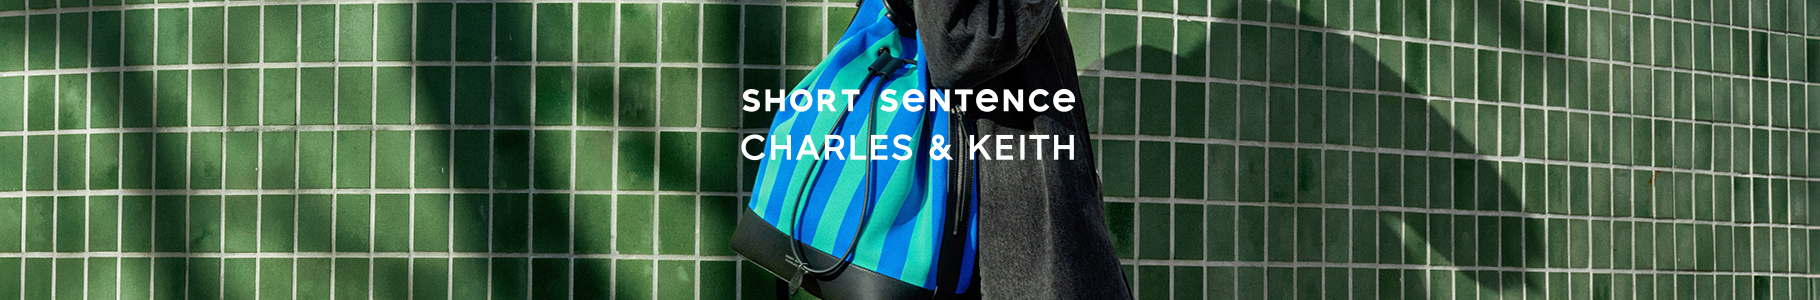 La collection CHARLES & KEITH x Short Sentence